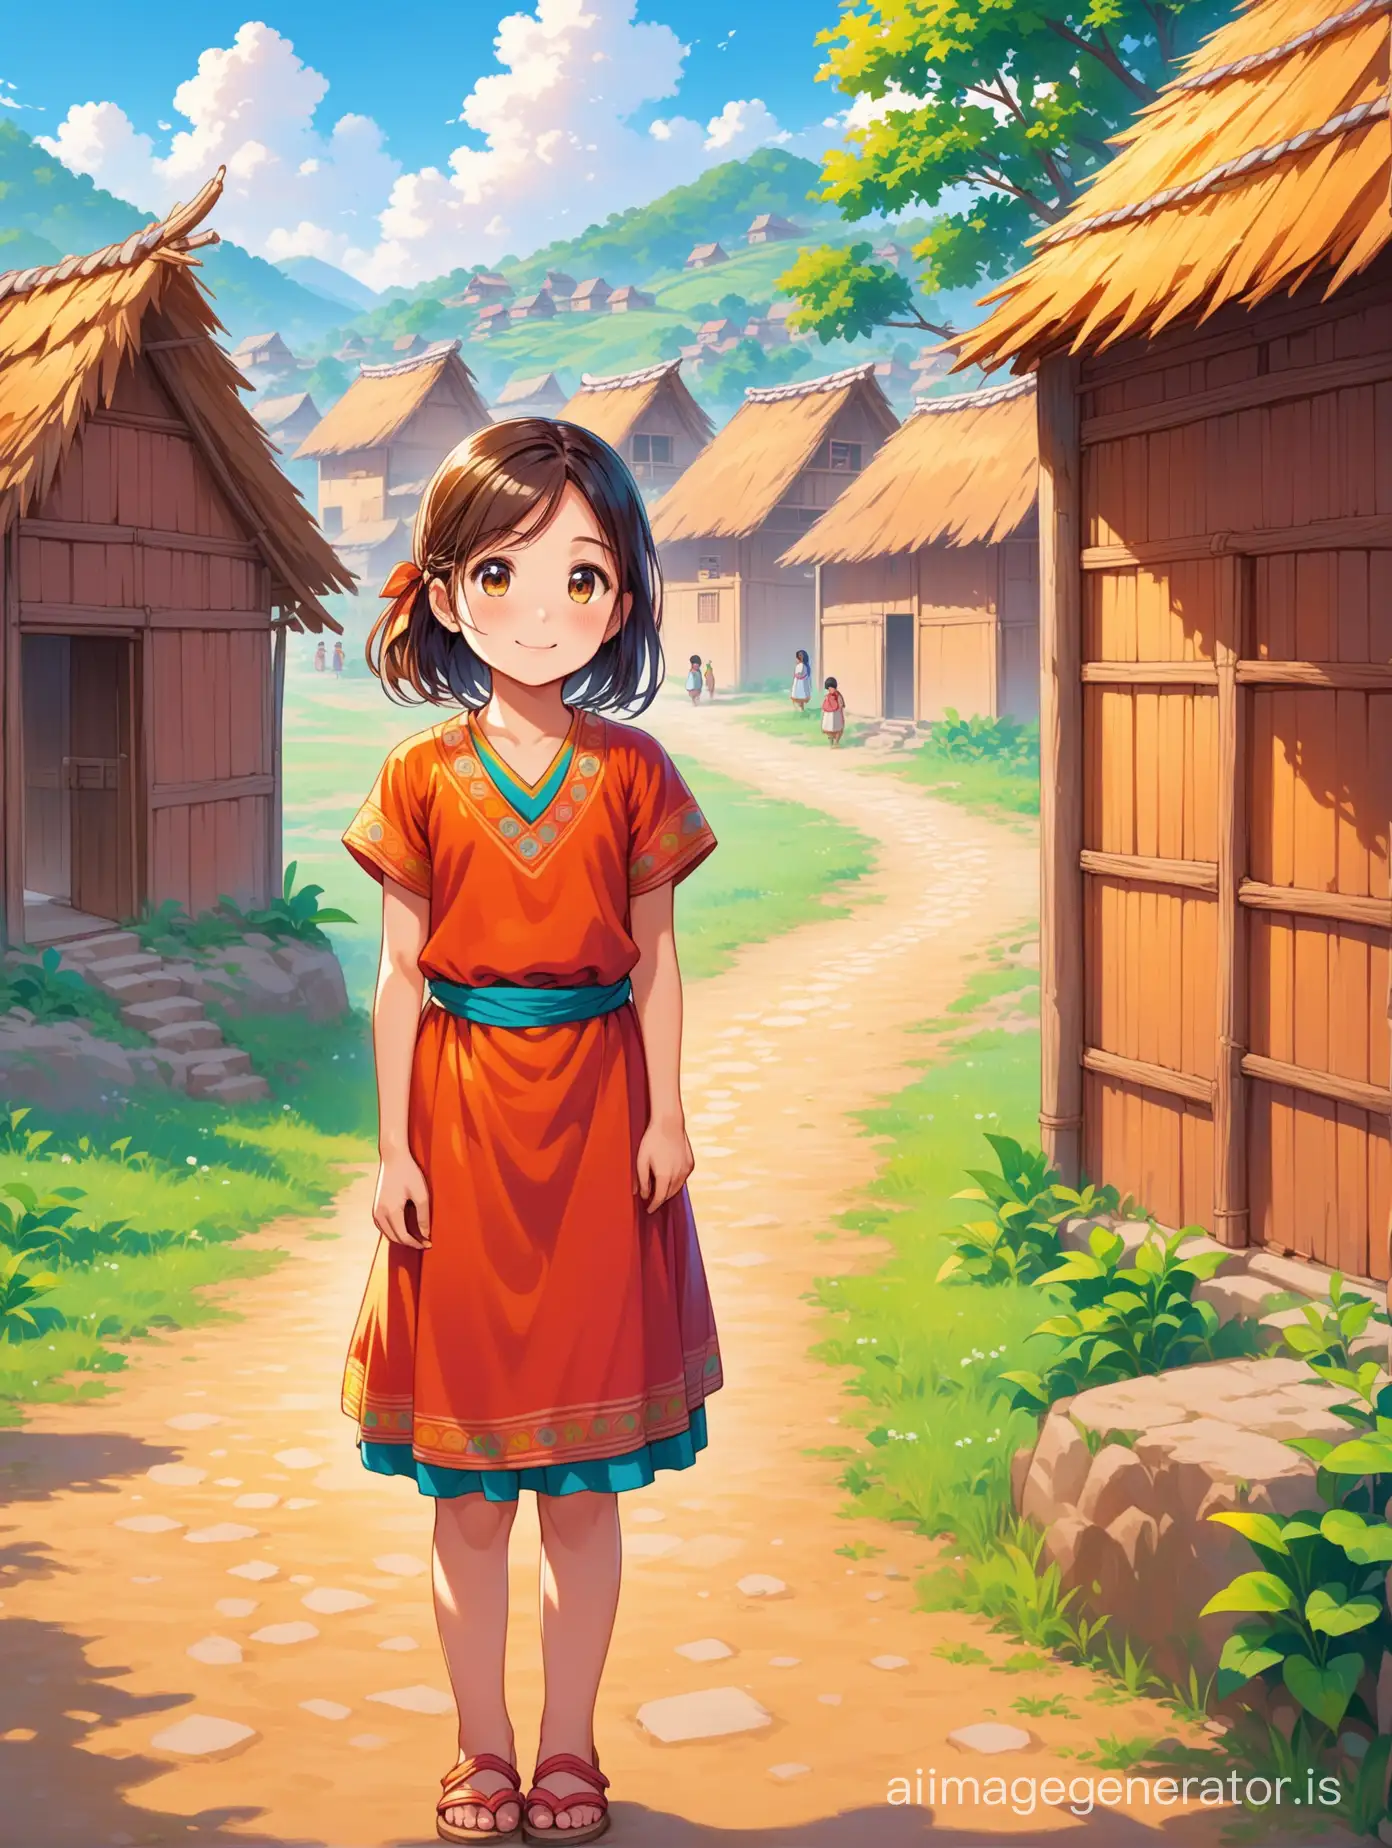 Show a girl in her village, with colorful houses and friendly villagers.
Girl should be depicted as a young, brave girl with a curious expression.